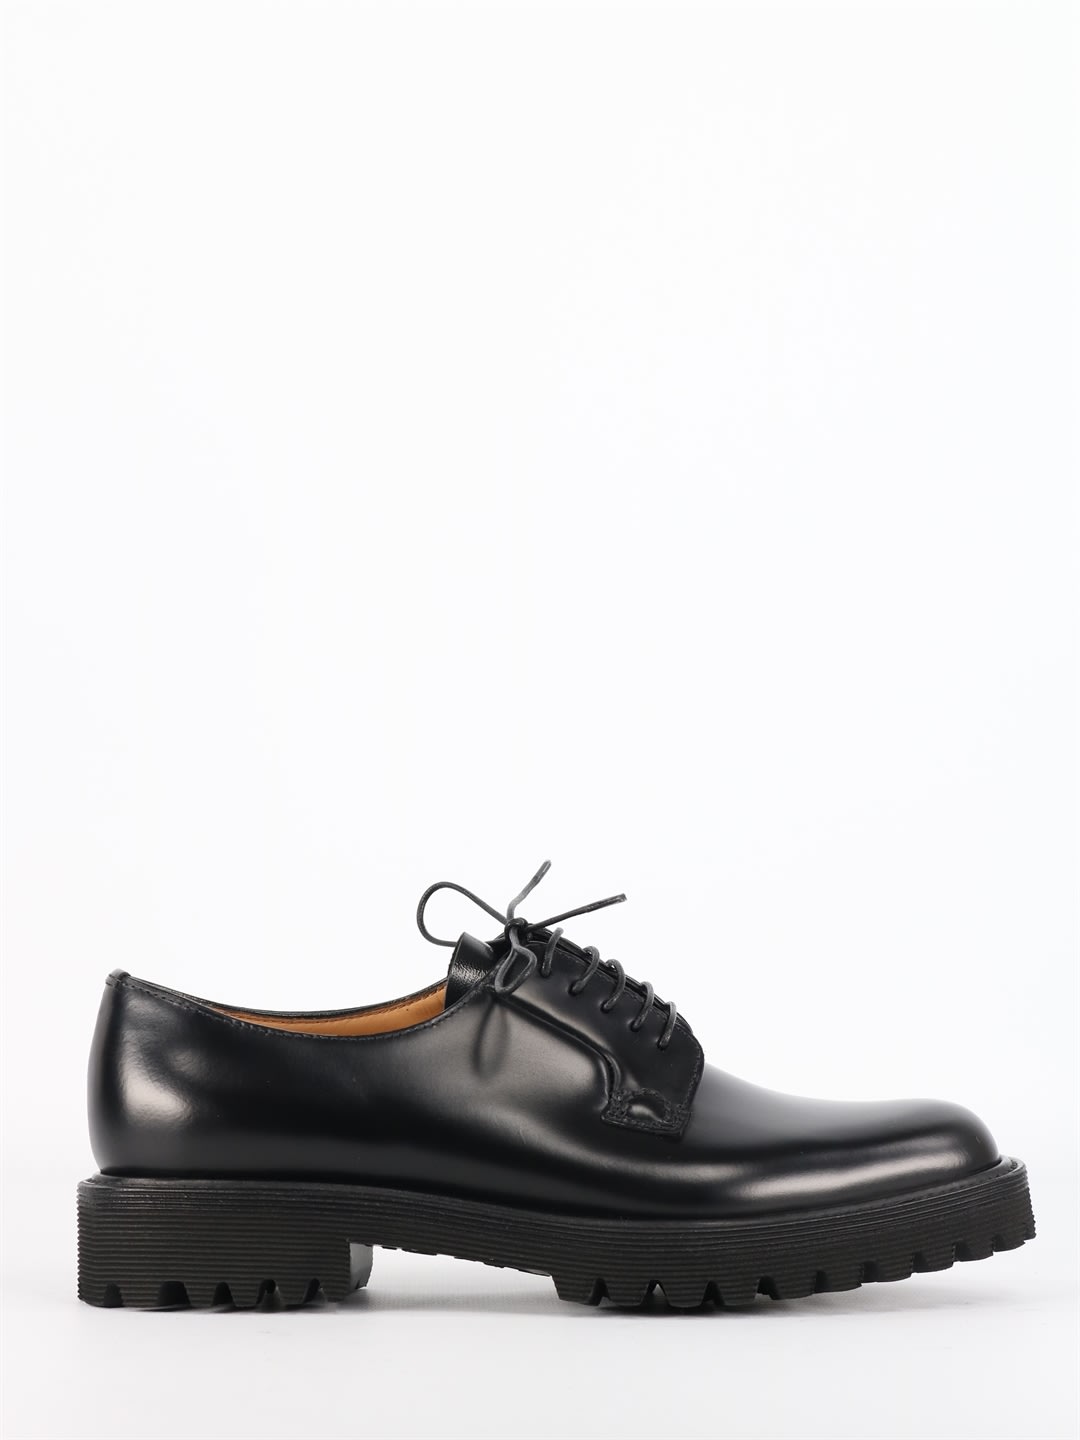 Churchs Lace-up Shoes In Black Leather